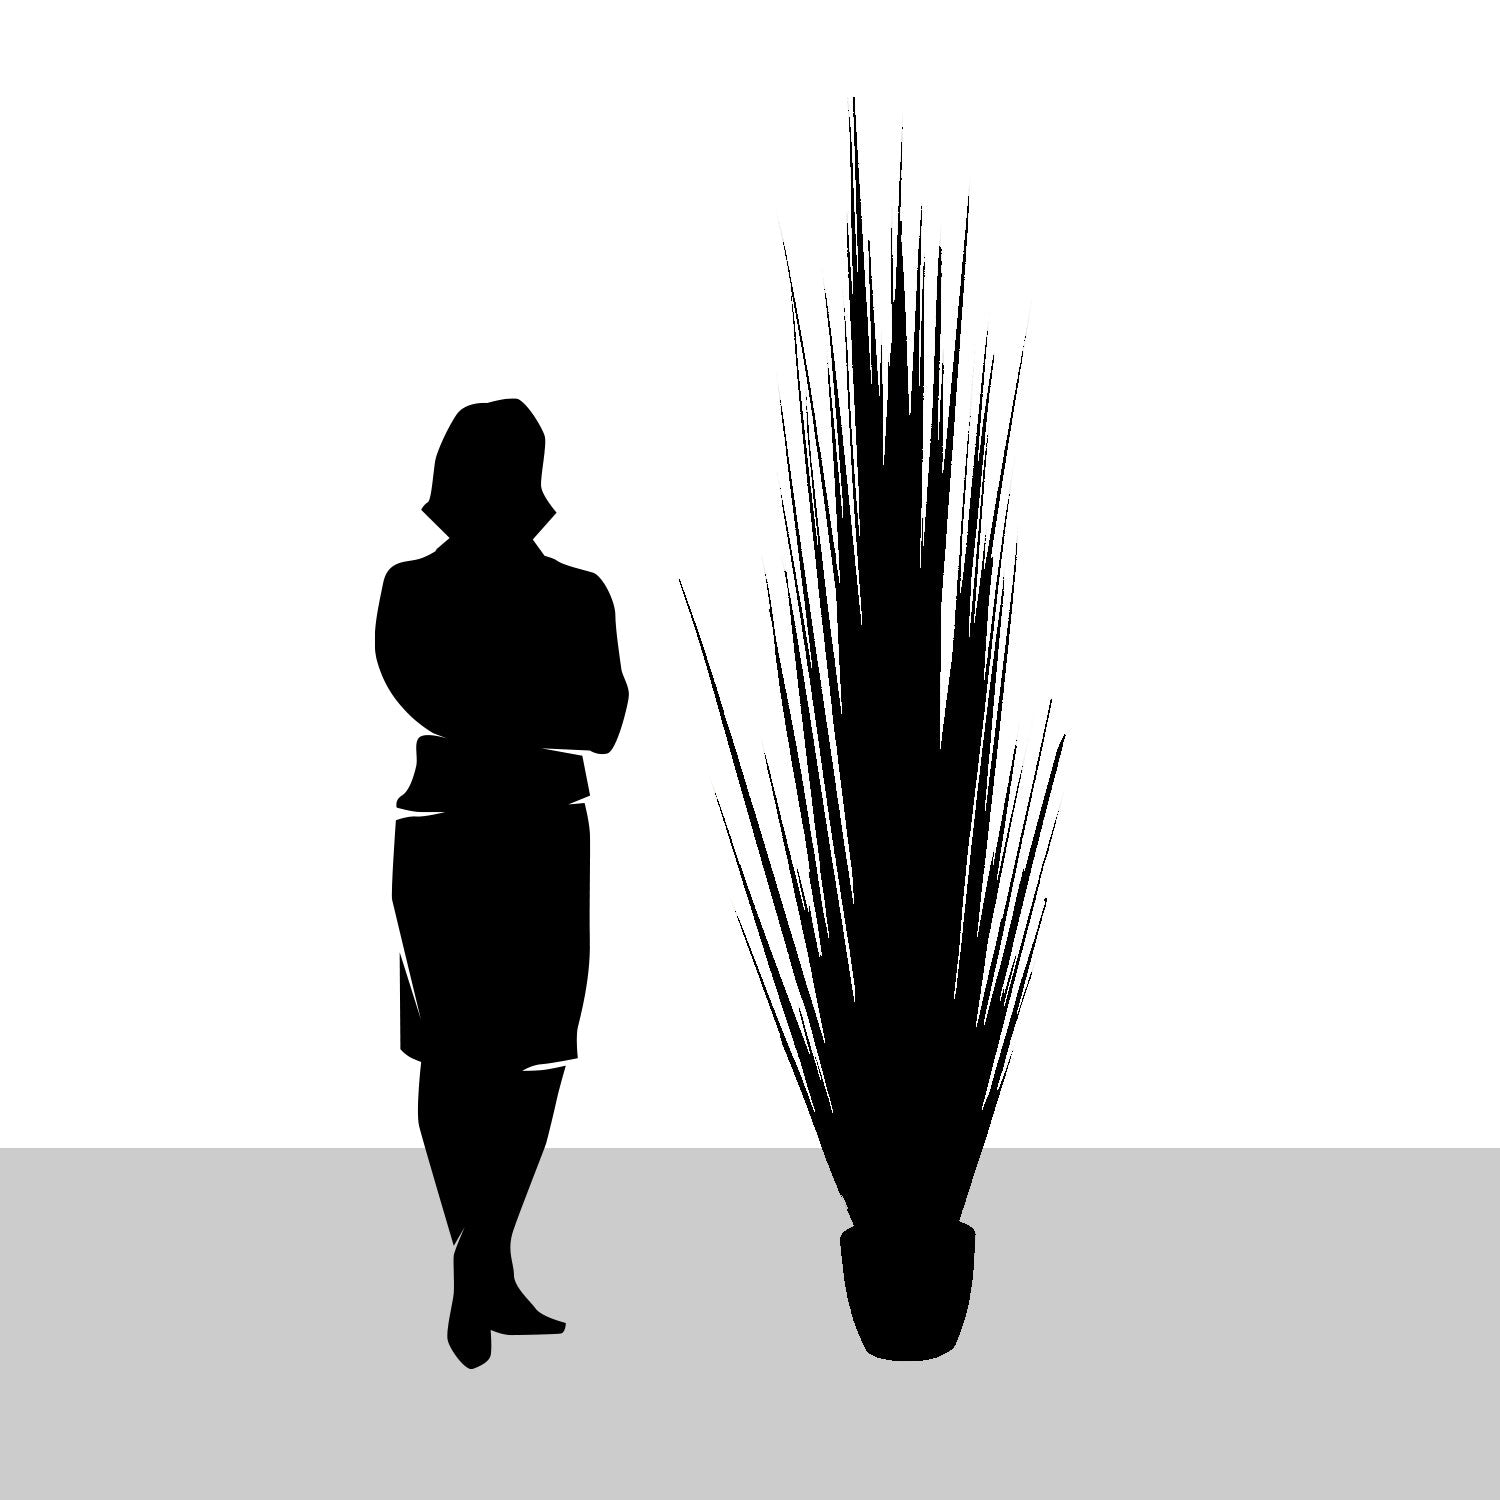 Grass: Century 86"H, Potted